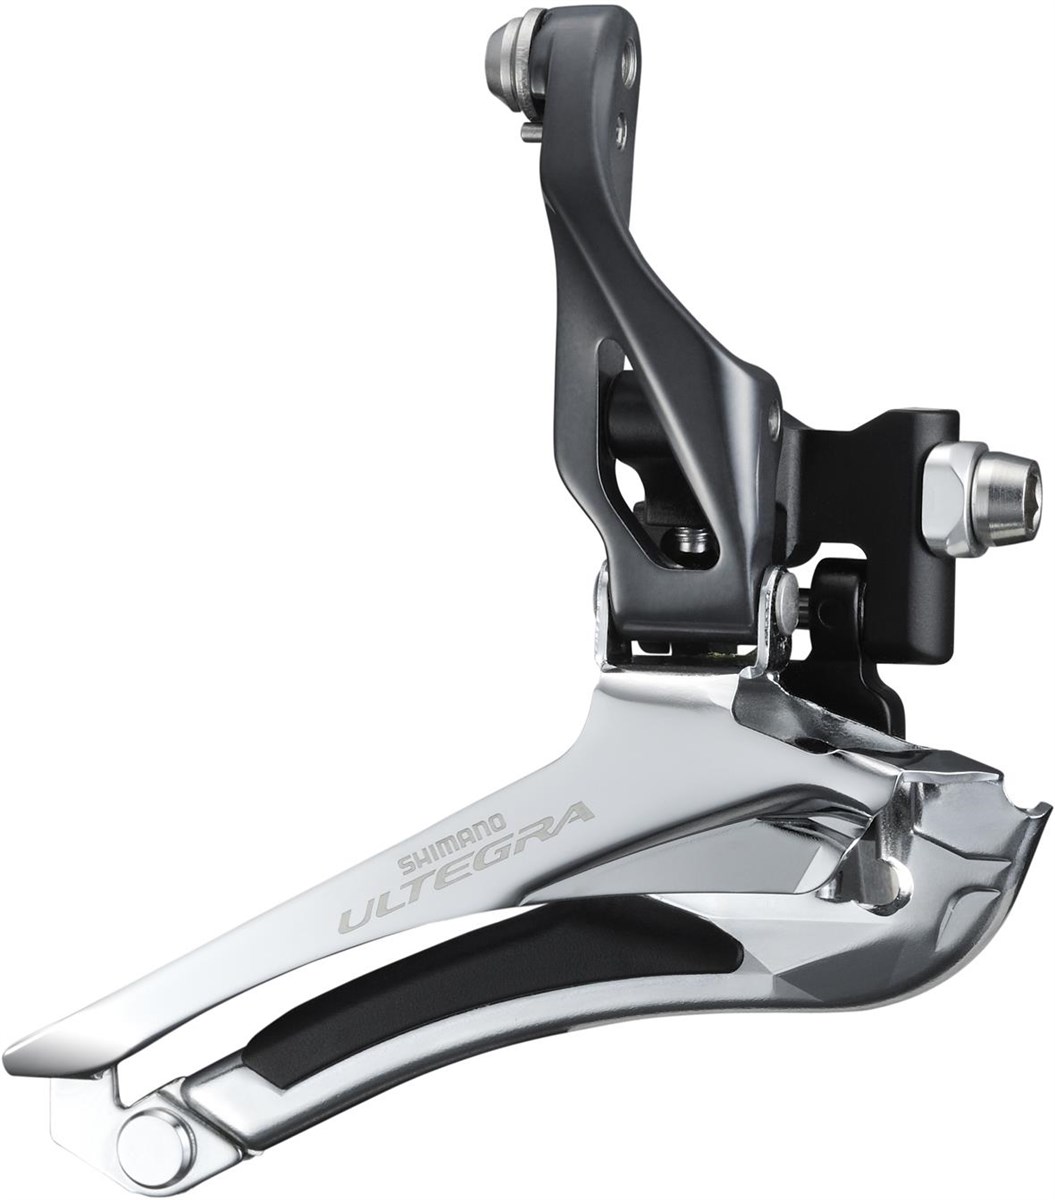 Shimano FD-6800 Ultegra 11 Speed Front Derailleur Double product image